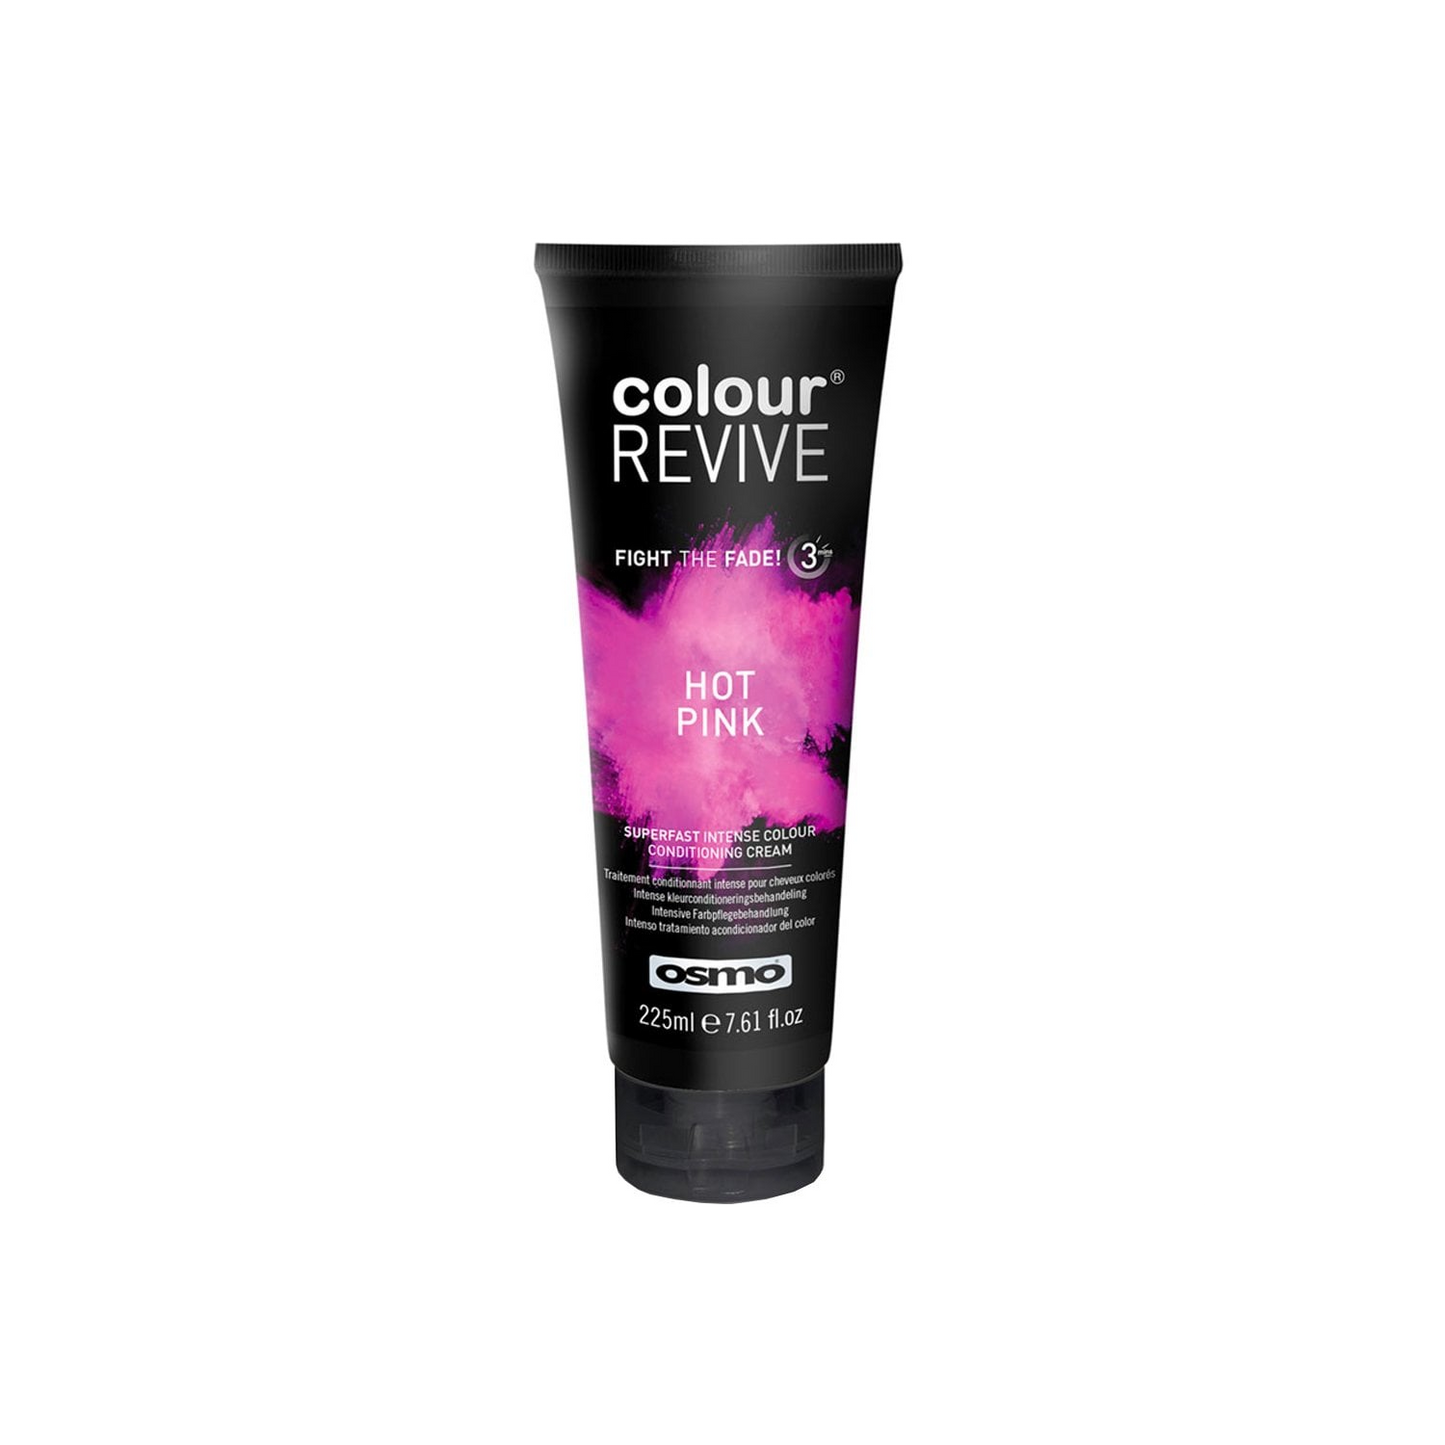 OSMO Colour Revive 225ml - Hot Pink